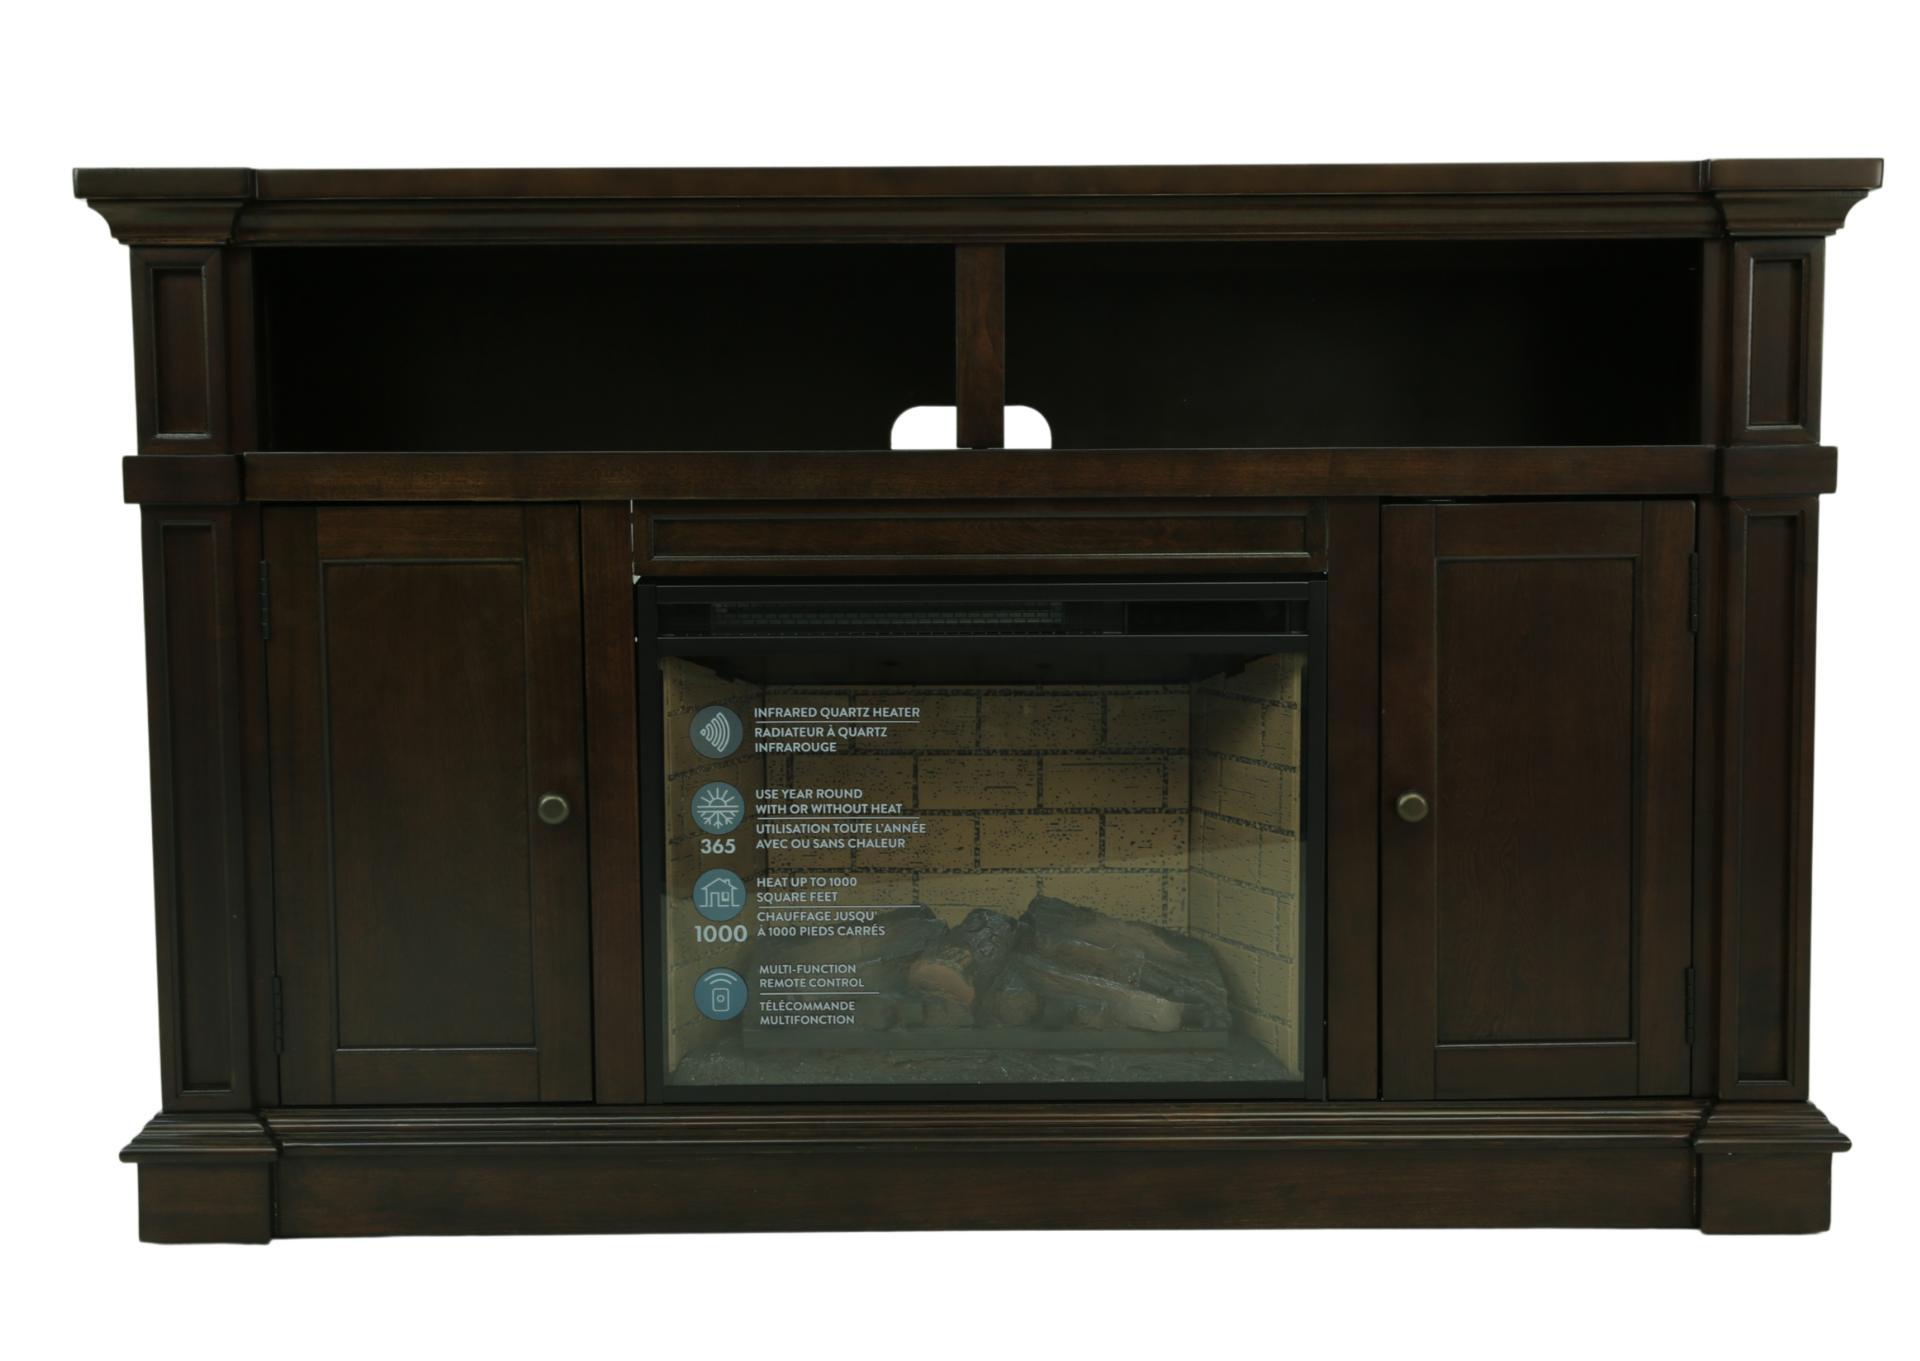 CRAWFORD CHERRY FIREPLACE WITH INSERT,KITH FURNITURE